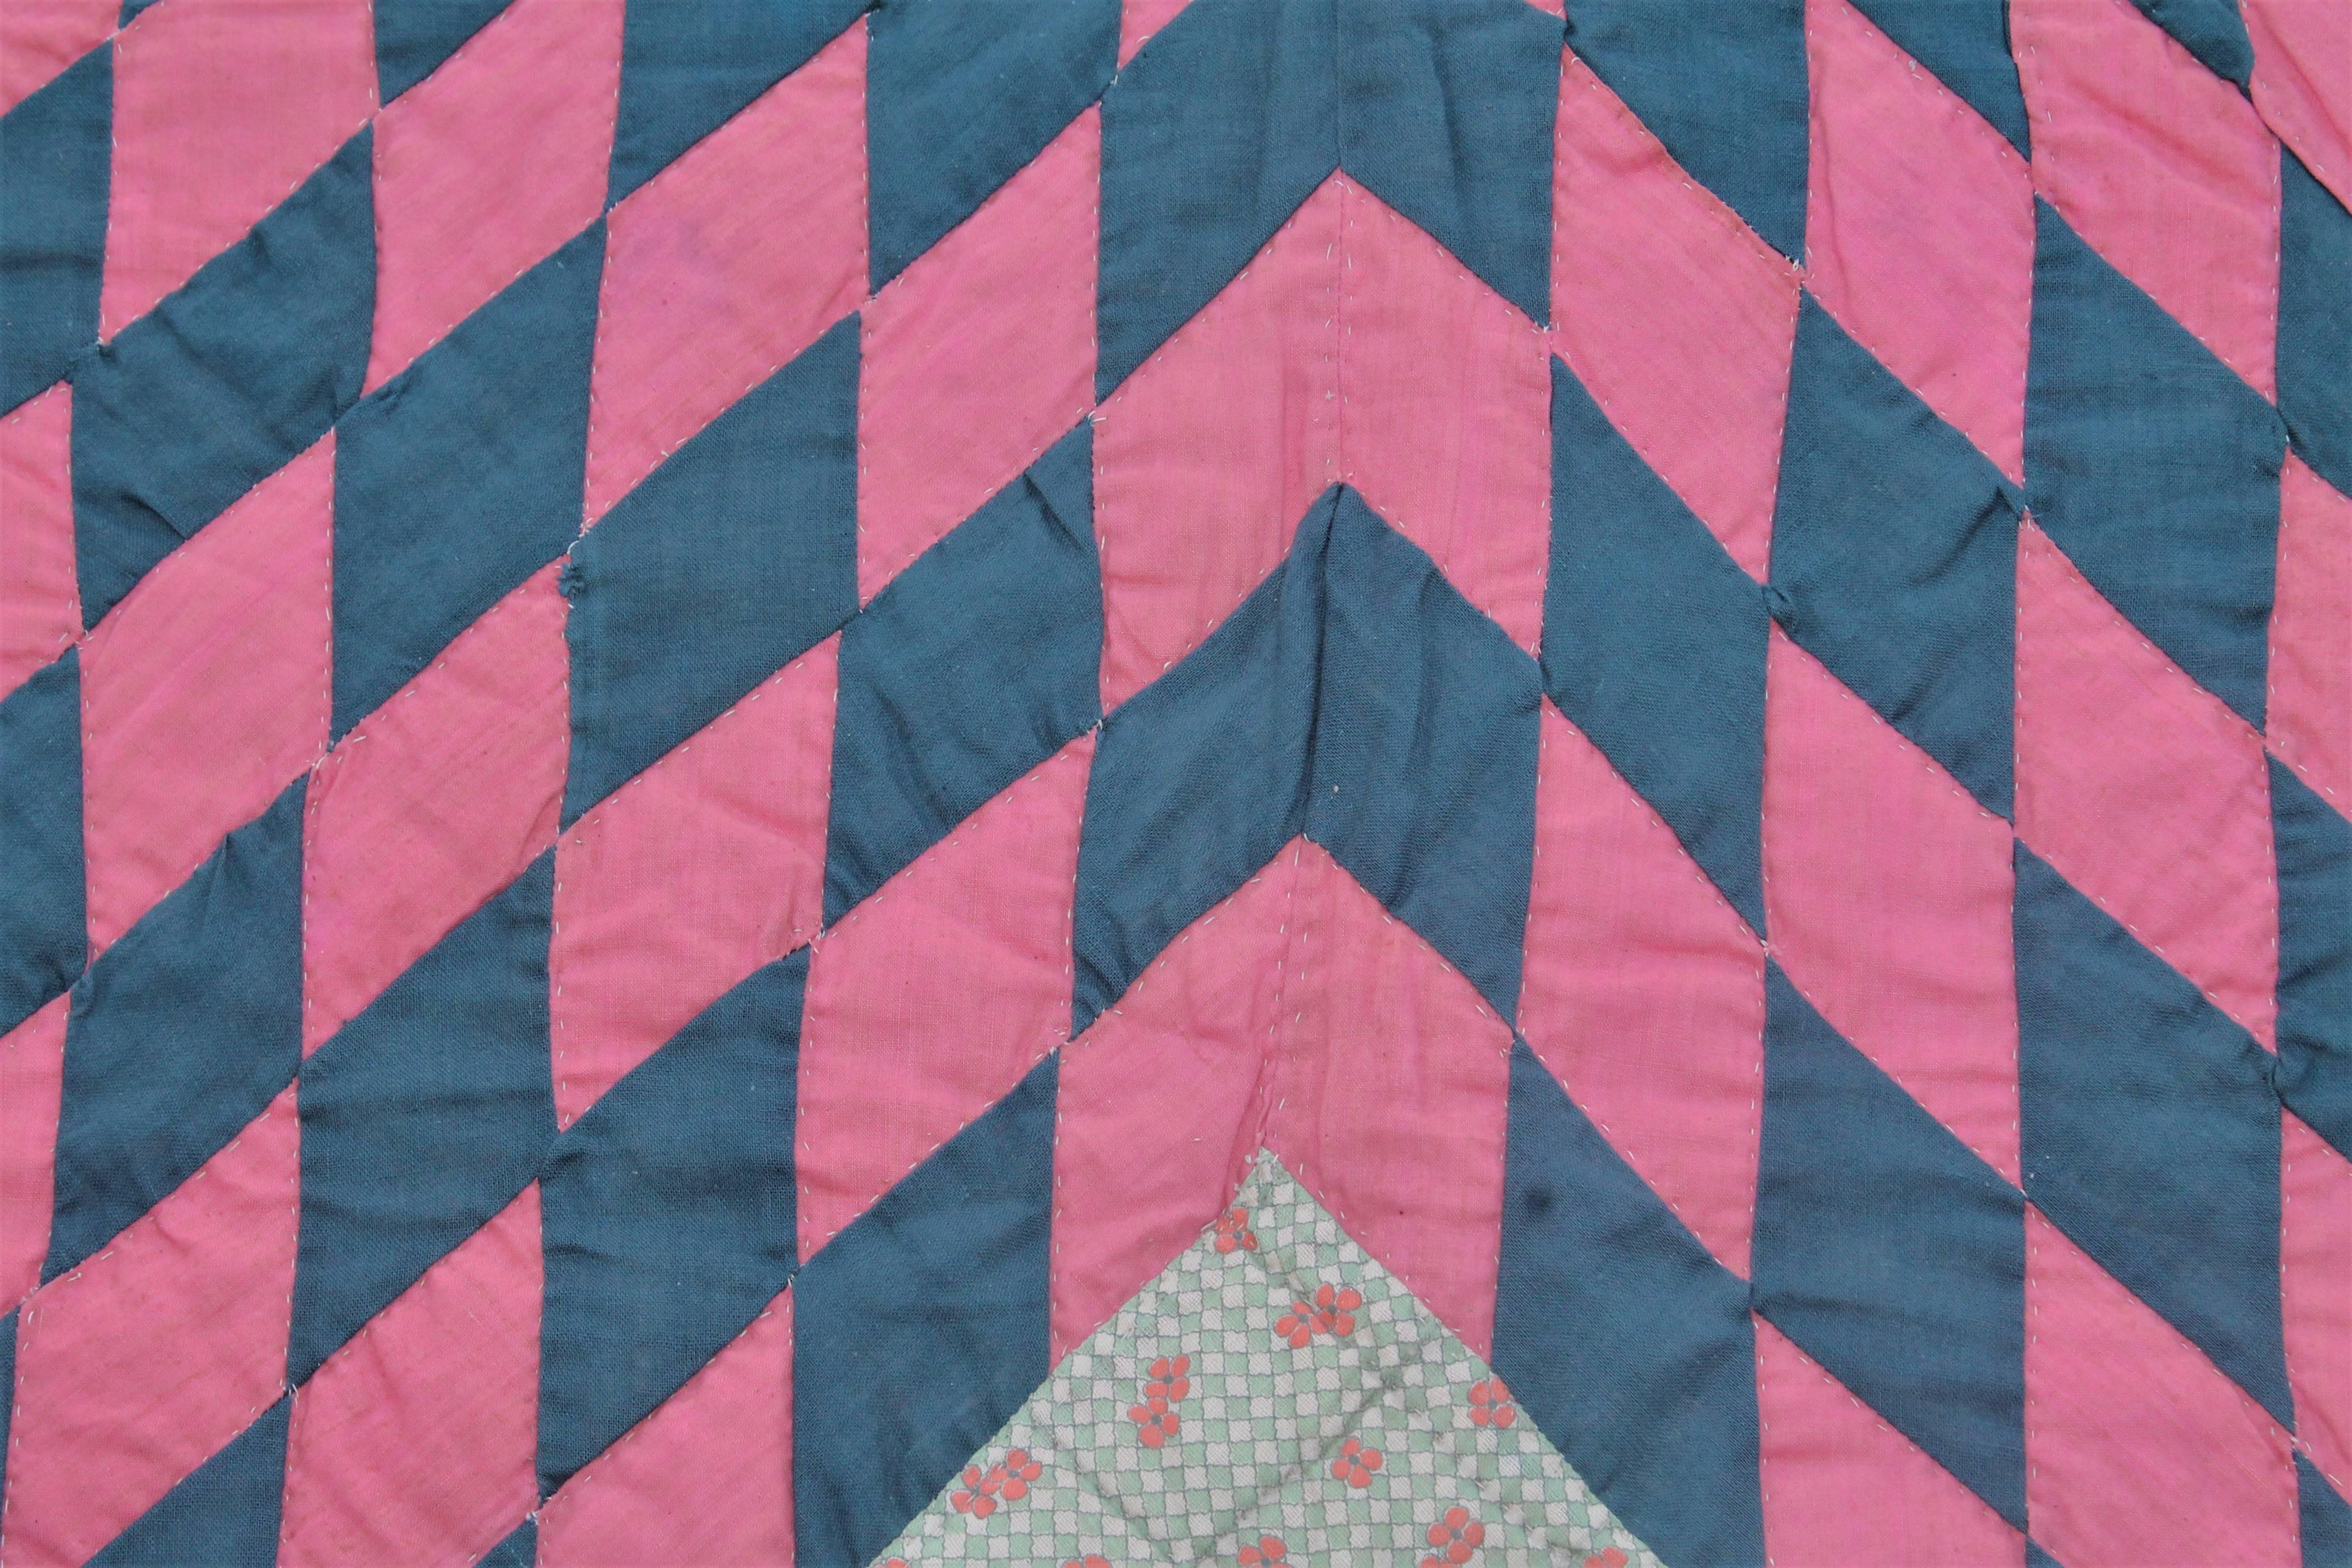 This fine example star quilt from Pennsylvania has a teal green back round and very fine tight quilting. The condition is pristine.The calico ground is mint. This quilt is from Lancaster County, Pennsylvania.